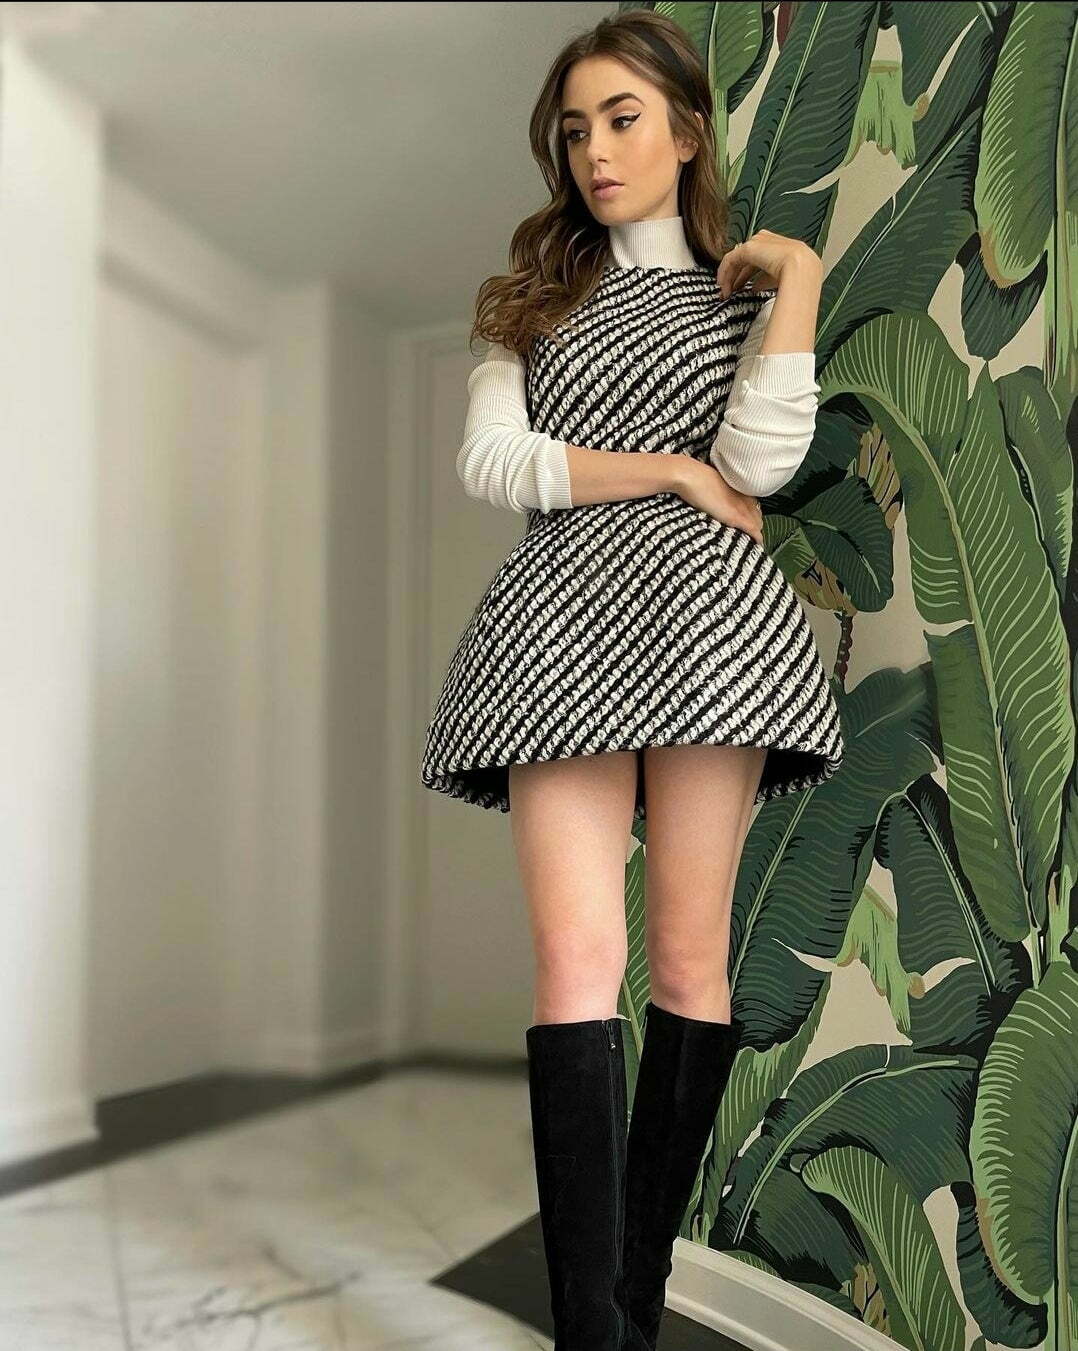 The legs on Lily Collins